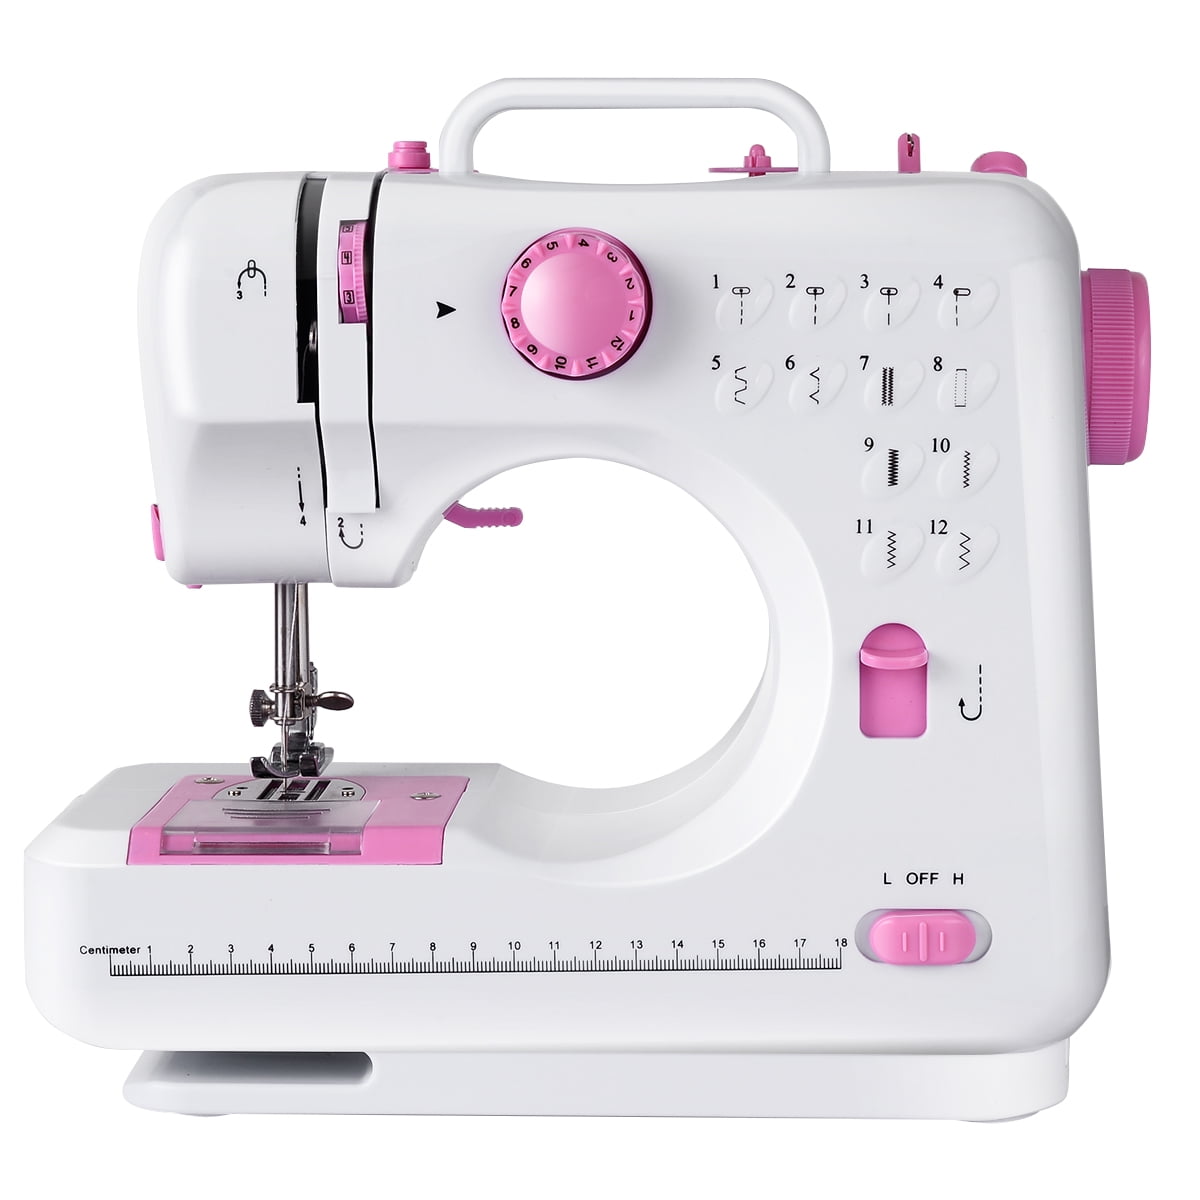 Sewing Hacks Tested: Can You Serge with Your Sewing Machine Using an  Overlock Foot? — The Mermaid's Den